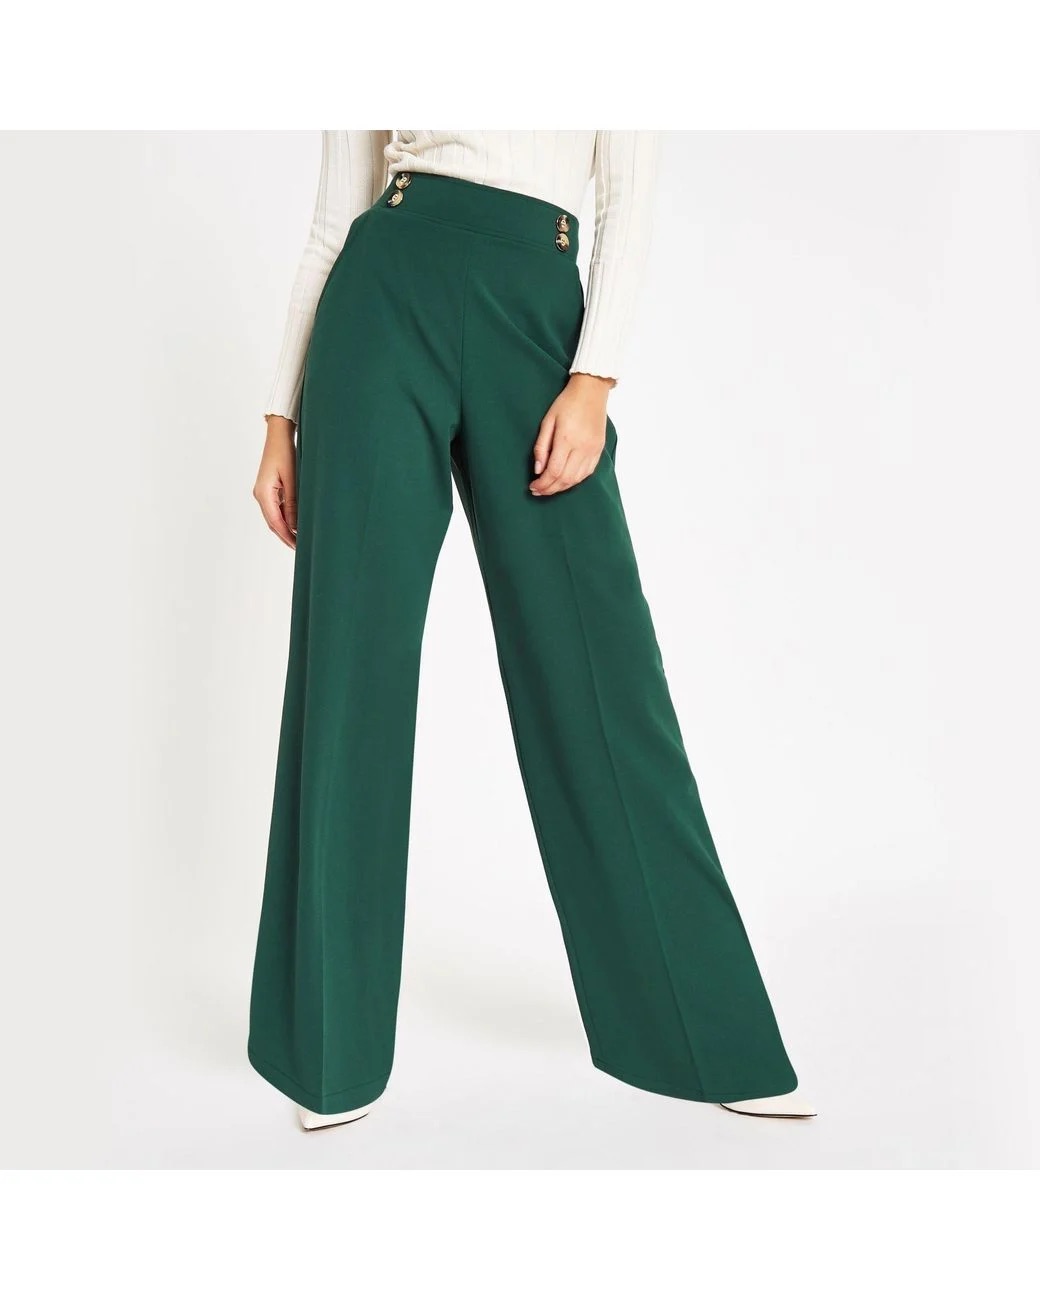 10 Outfits with Green Pants - Ultimate Styling Guide [2022]